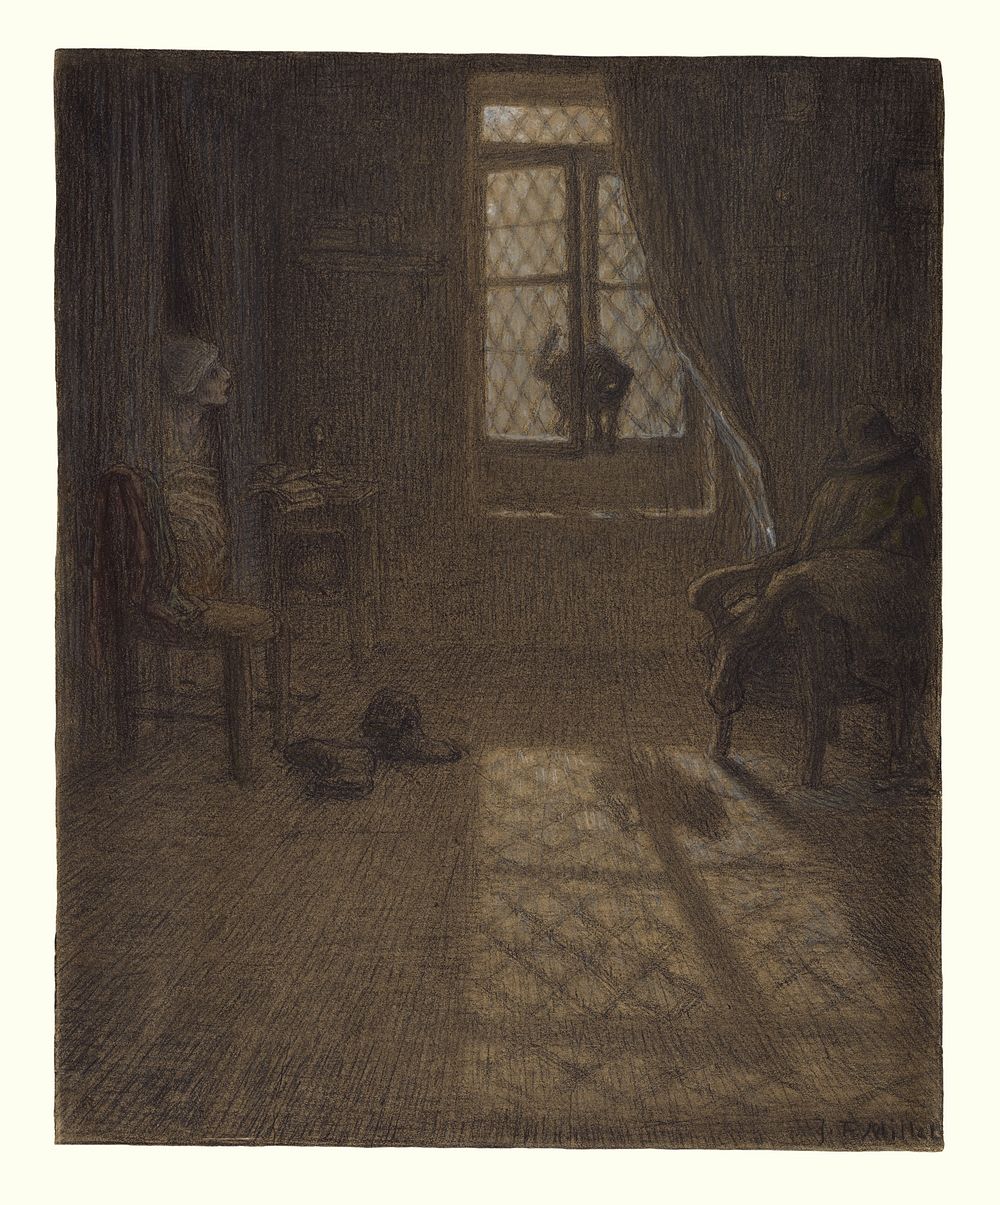 "Le chat" or The Cat at the Window by Jean François Millet